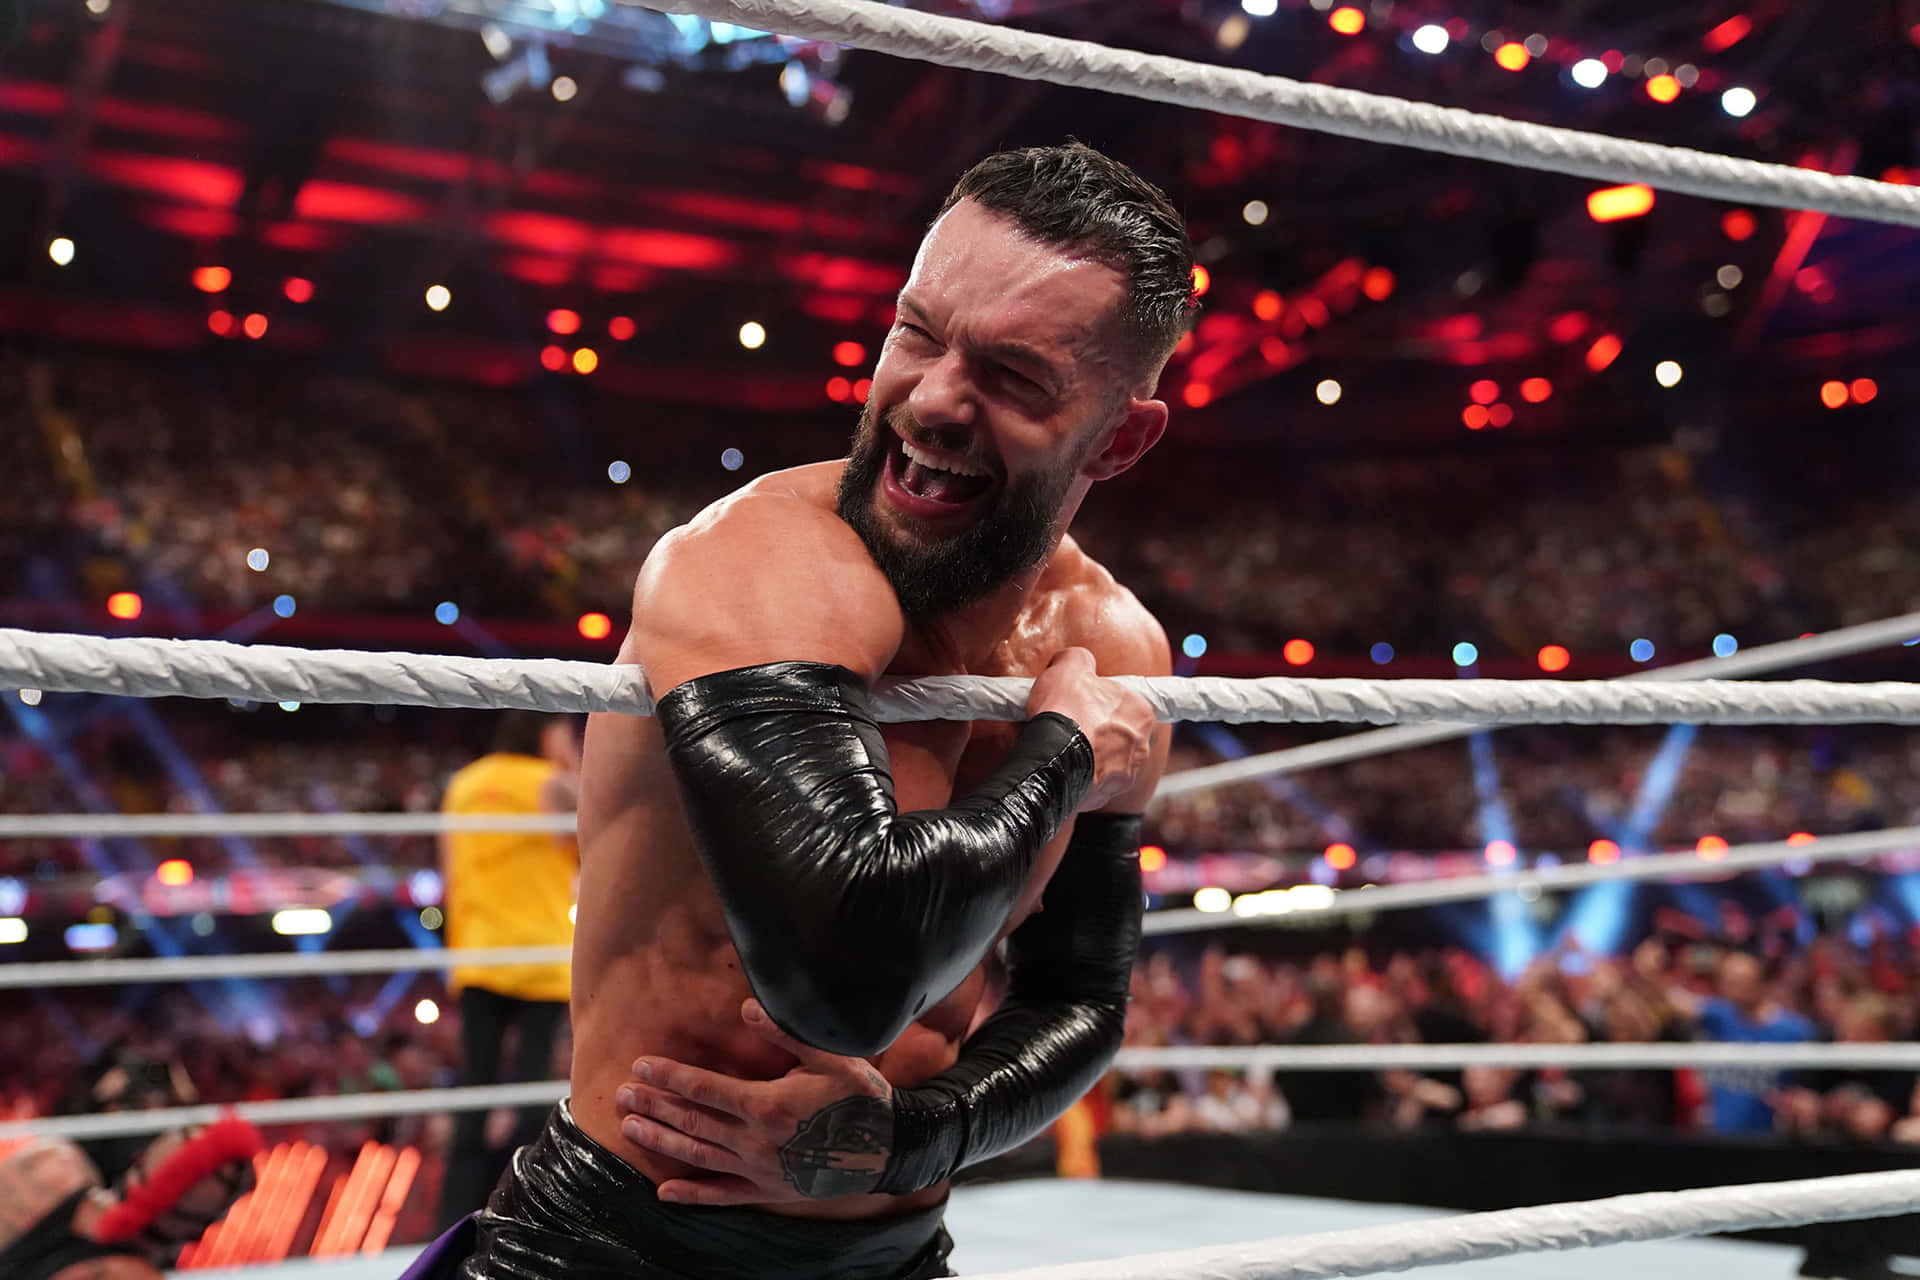 Strict Perseverance Personified, Fin Balor Beams In This Stellar Wrestling Shot. Background